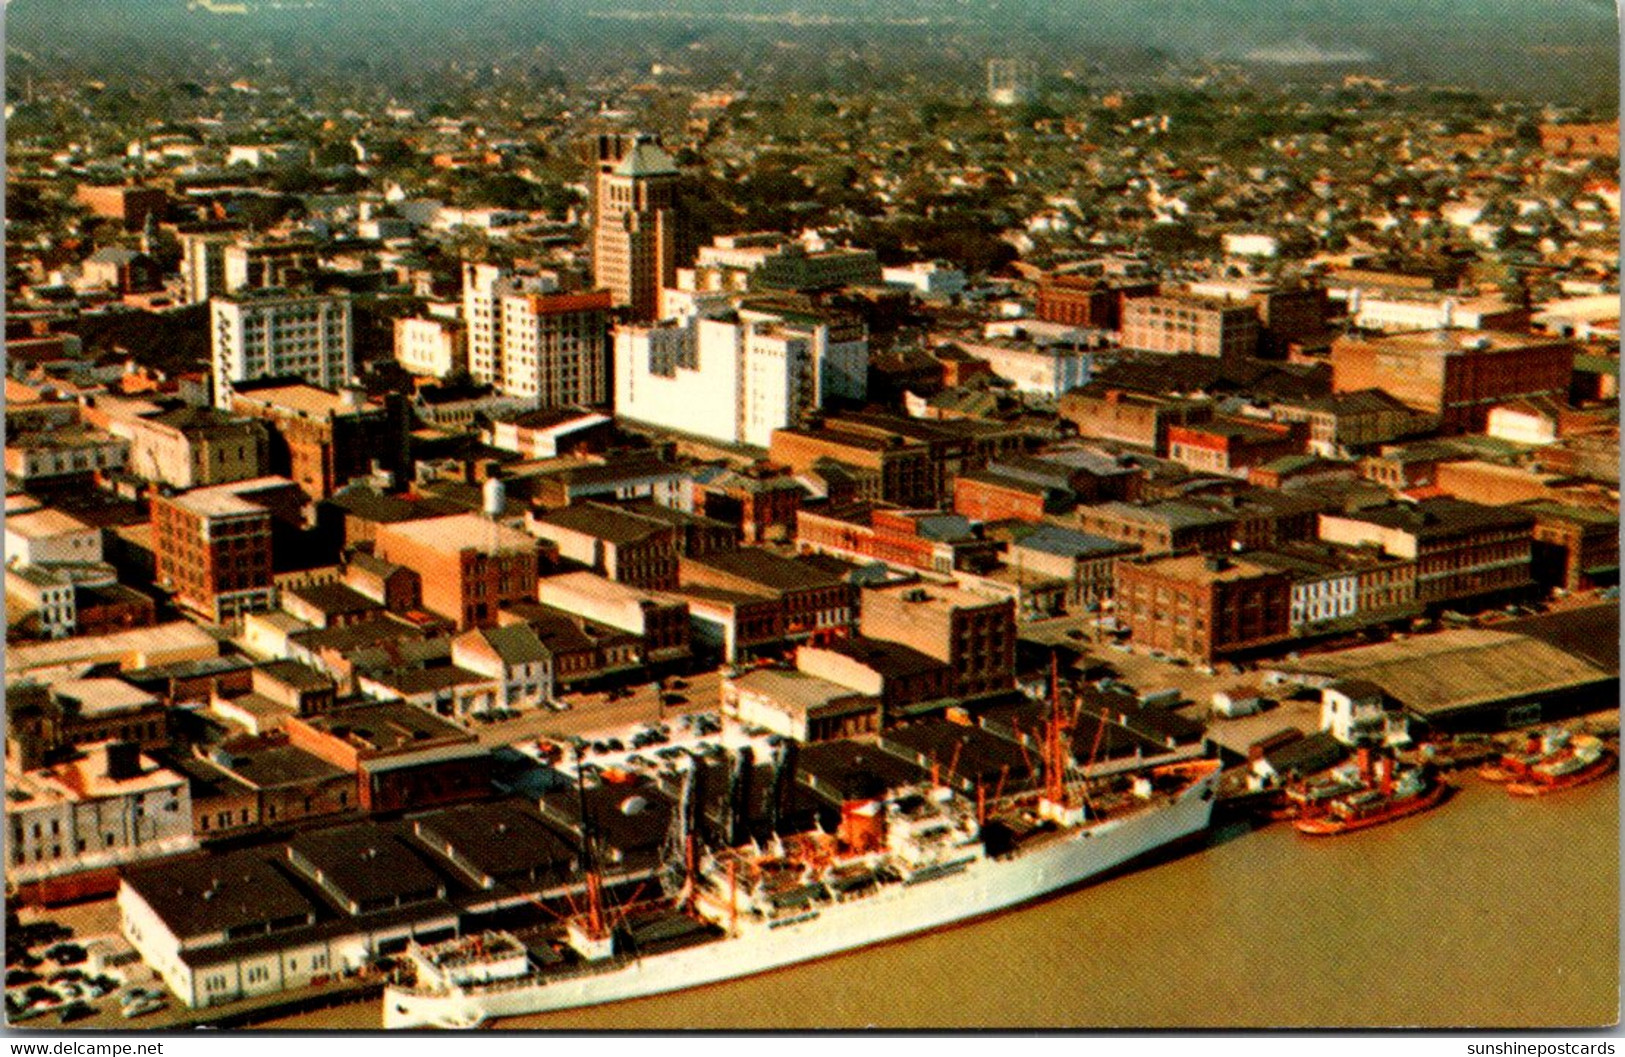 Alabama Mobile Downtown Business Section Aerial View Looking Northwest - Mobile